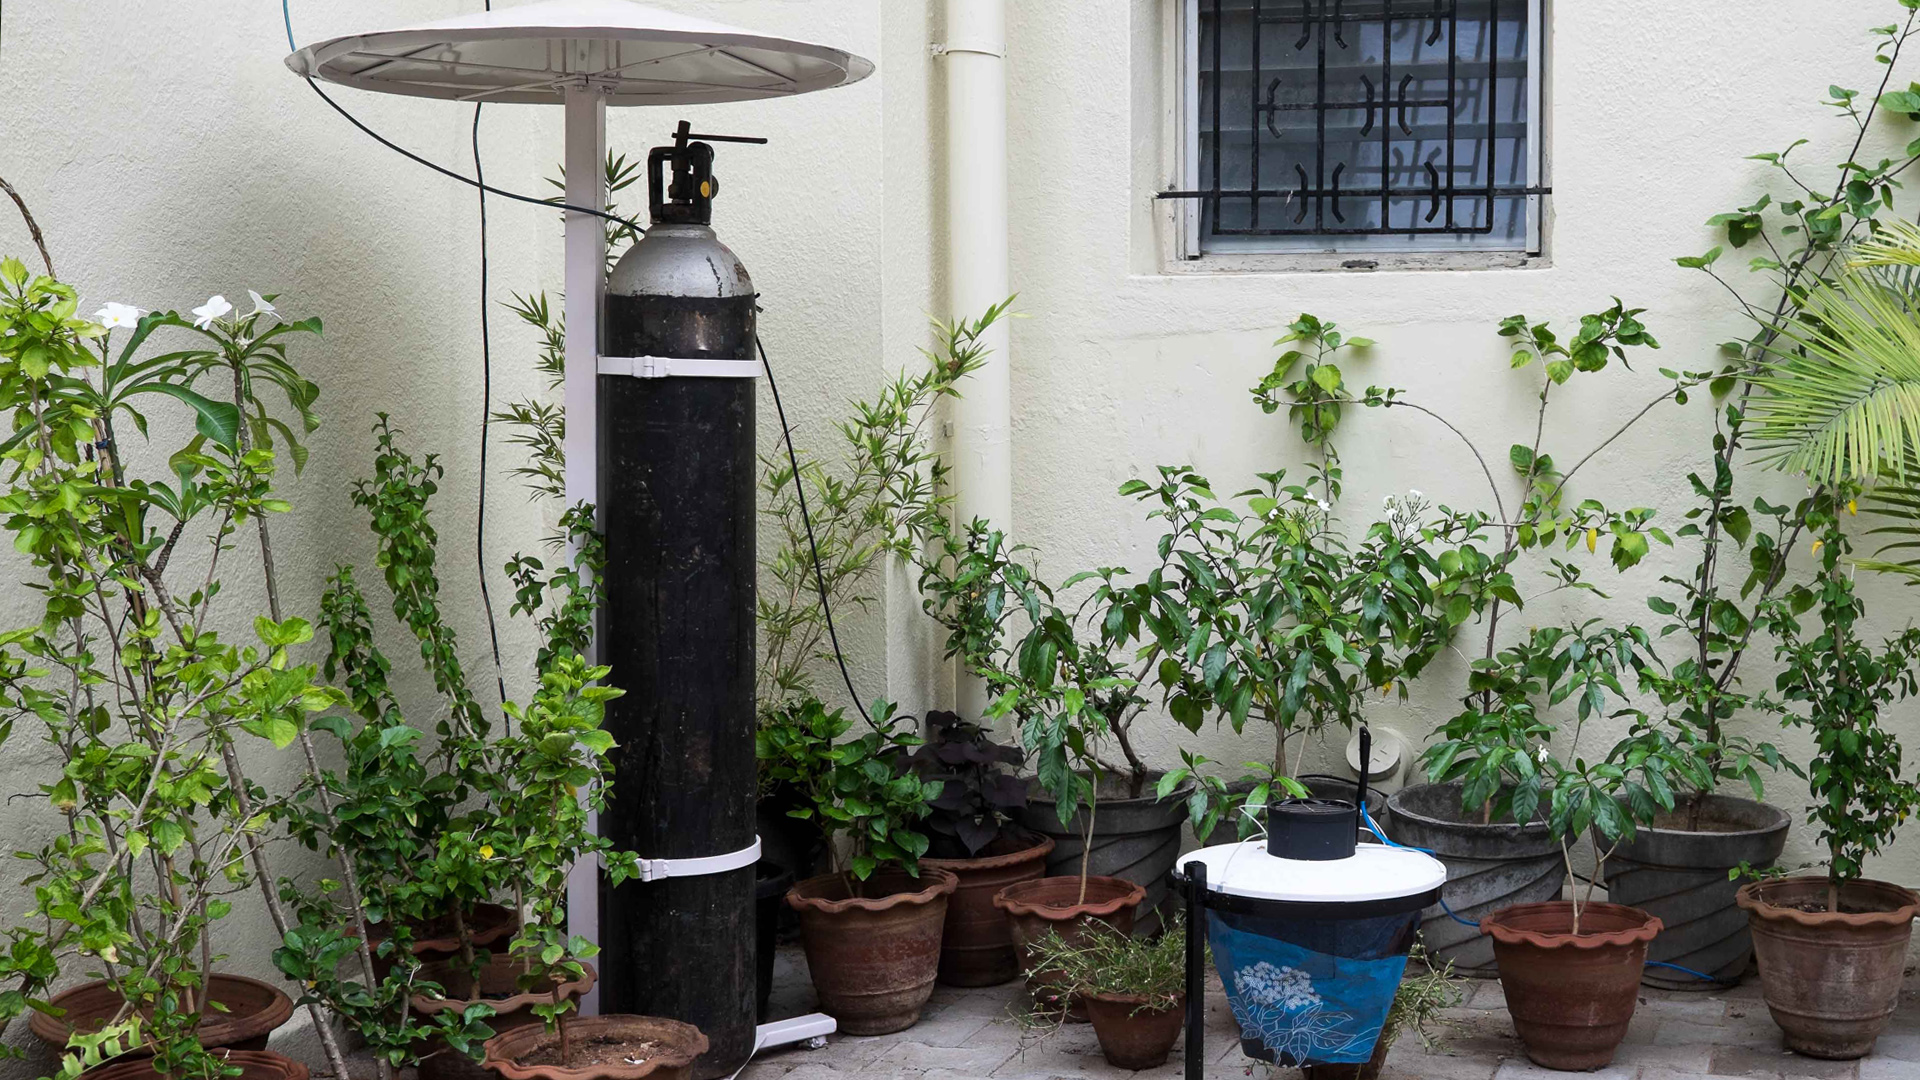 mosquito control system for your backyard